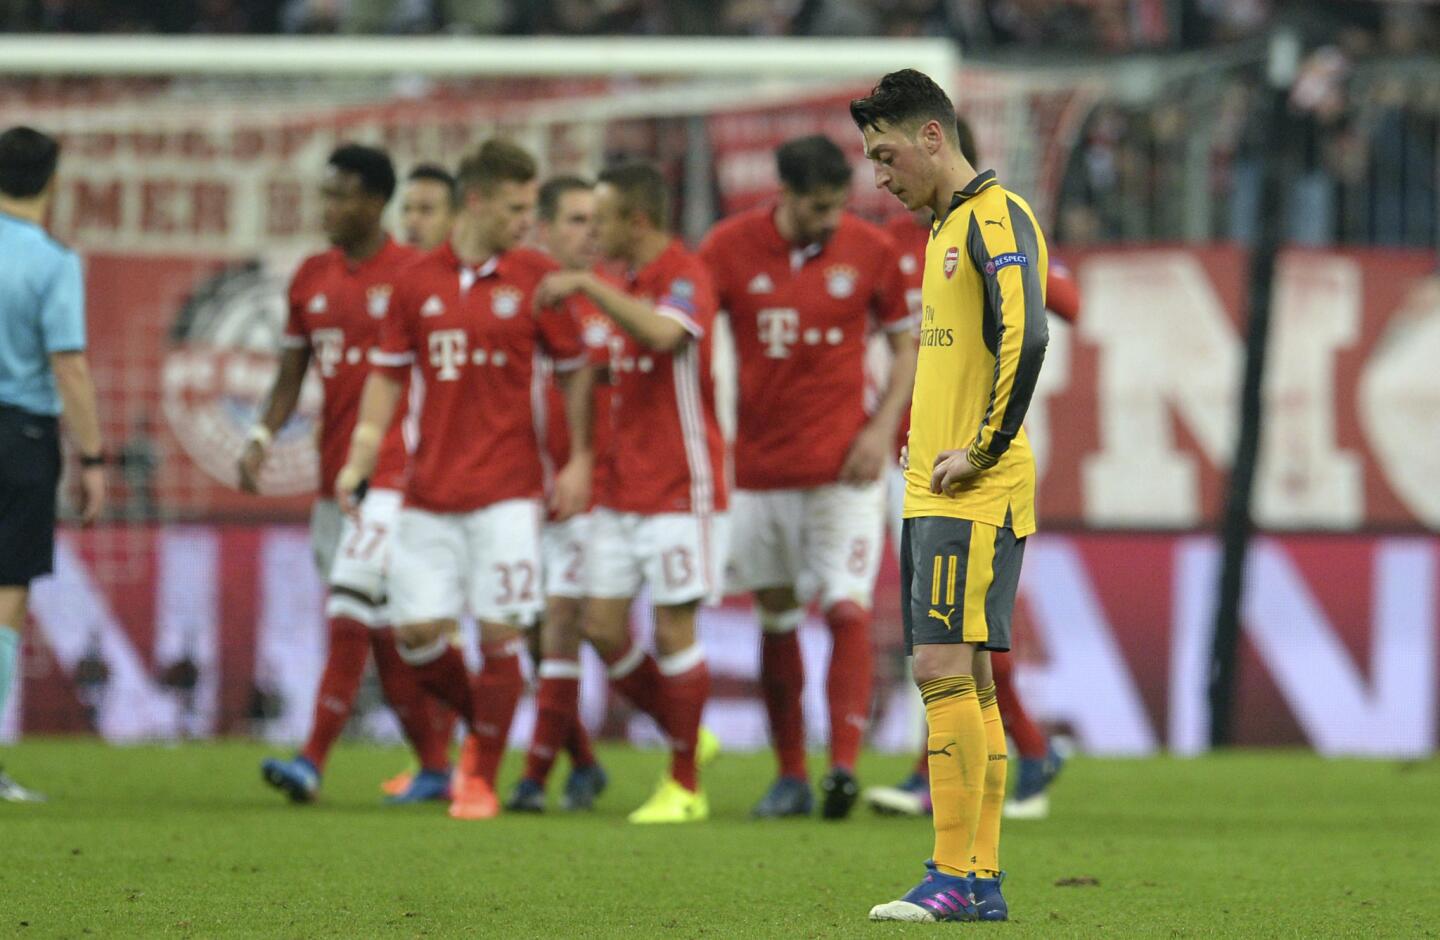 Arsenal's Mesut Ozil, right, looks disappointed after Bayern scored their fifth goal in the soccer Champions League round of 16 first leg soccer match between Bayern Munich and Arsenal FC in Munich, southern Germany, Wednesday, Feb. 15, 2017. (Andreas Gebert/dpa via AP)